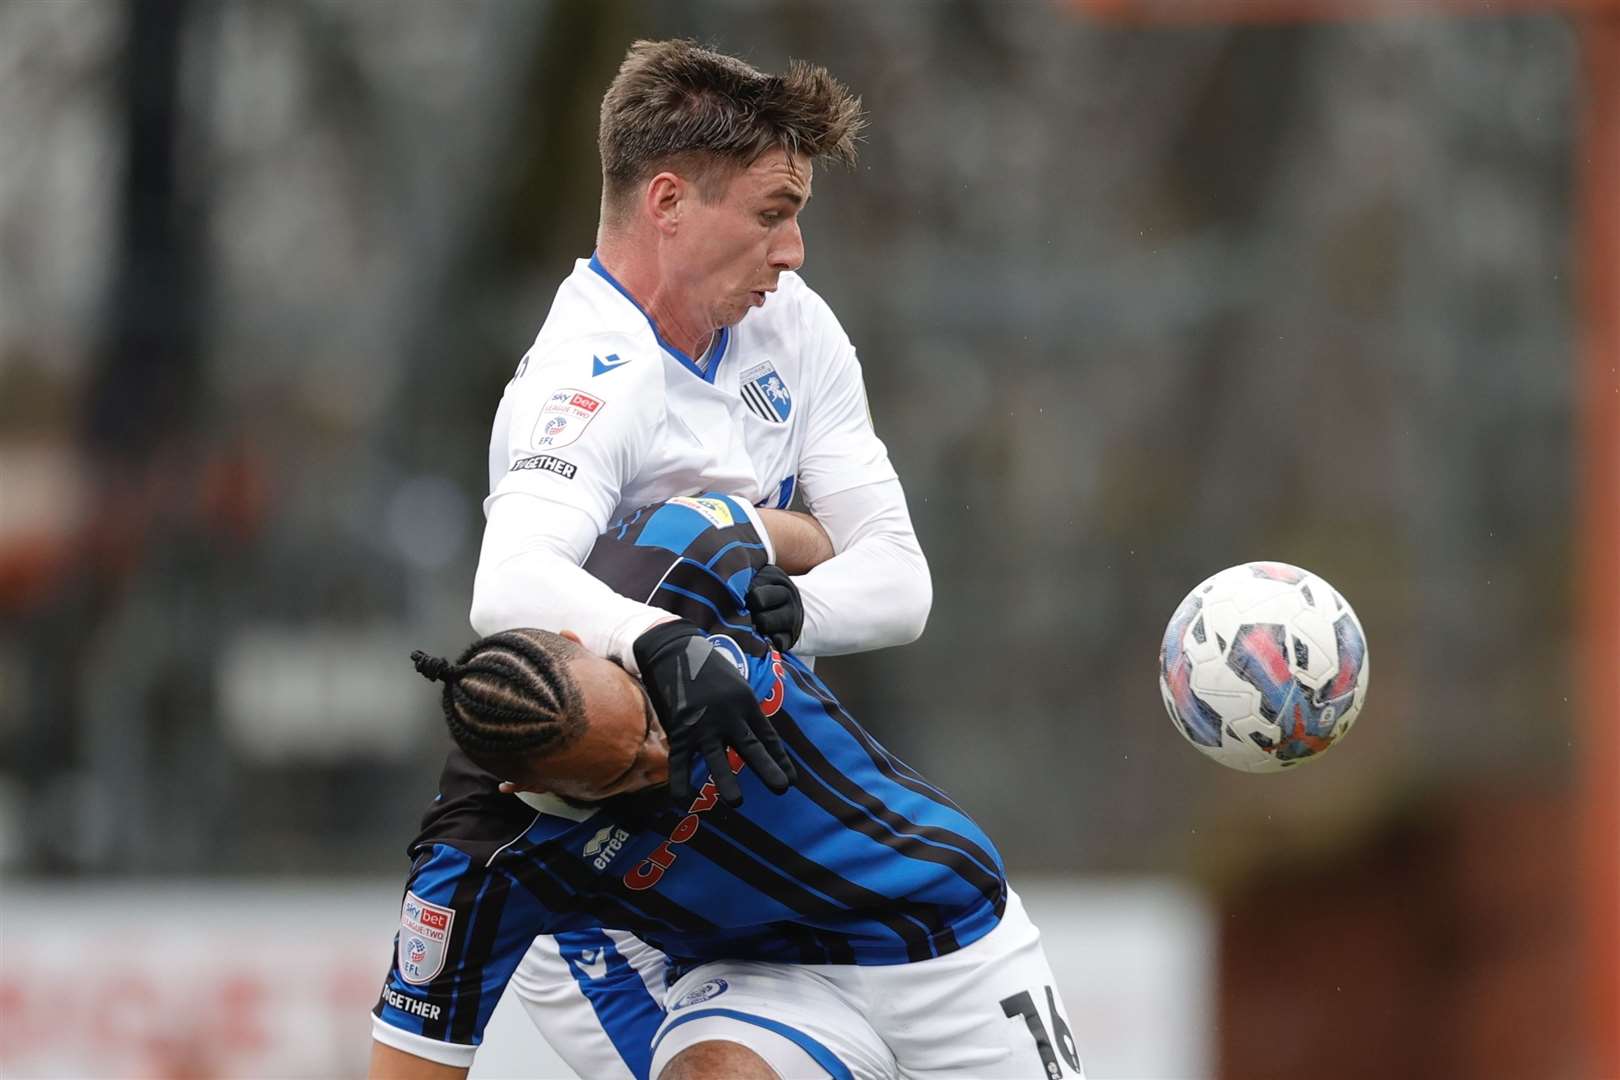 Oli Hawkins challenges Rhys Bennett for the ball in the League 2 match at Rochdale